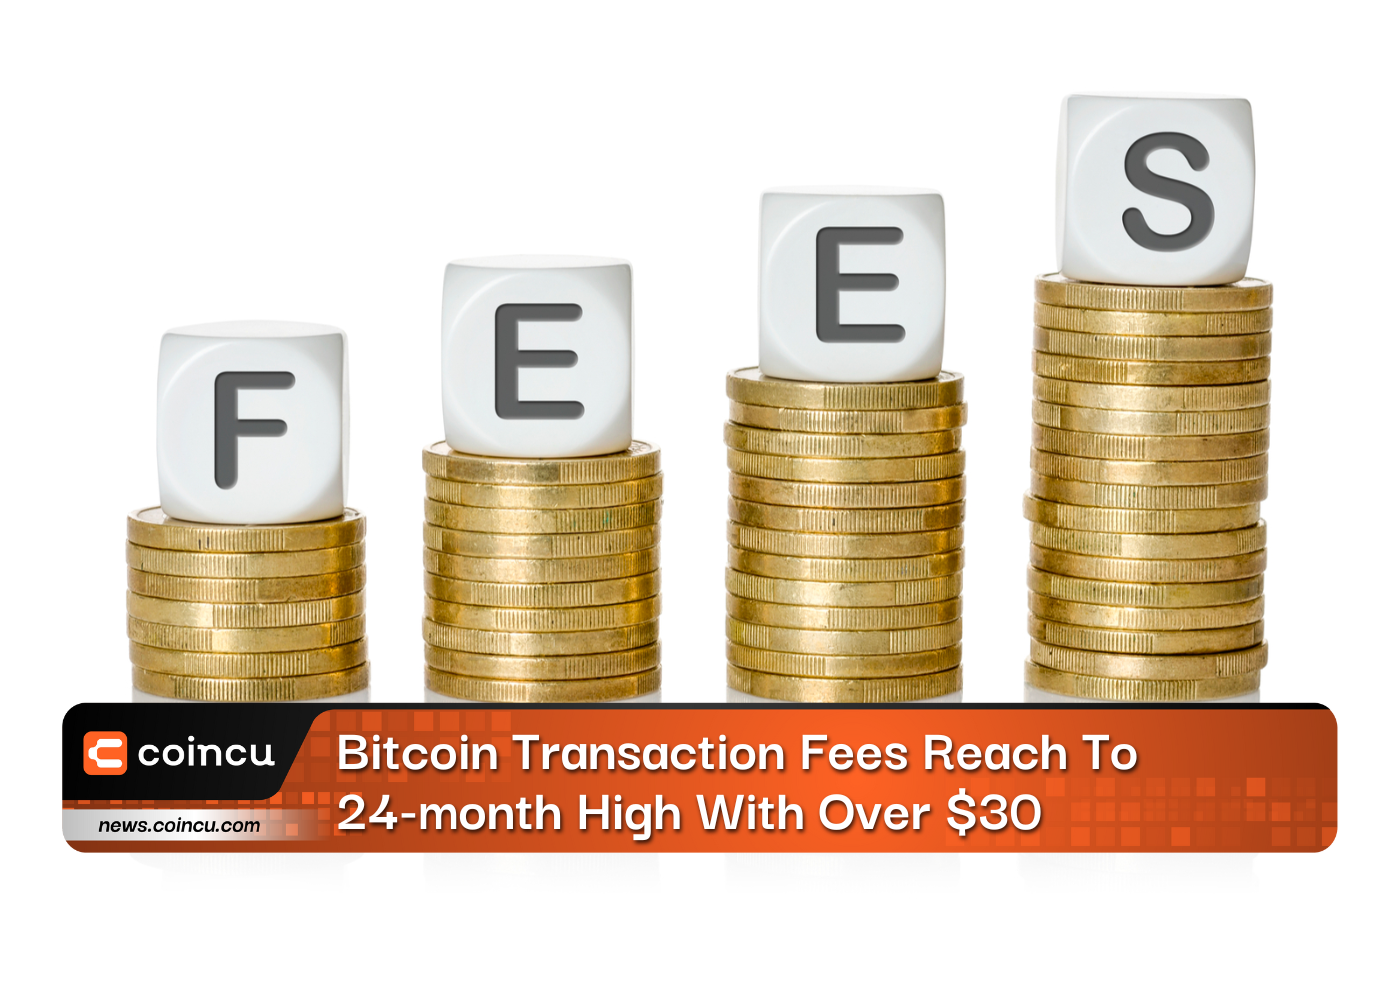 Bitcoin Transaction Fees Reach To 24-month High With Over $30